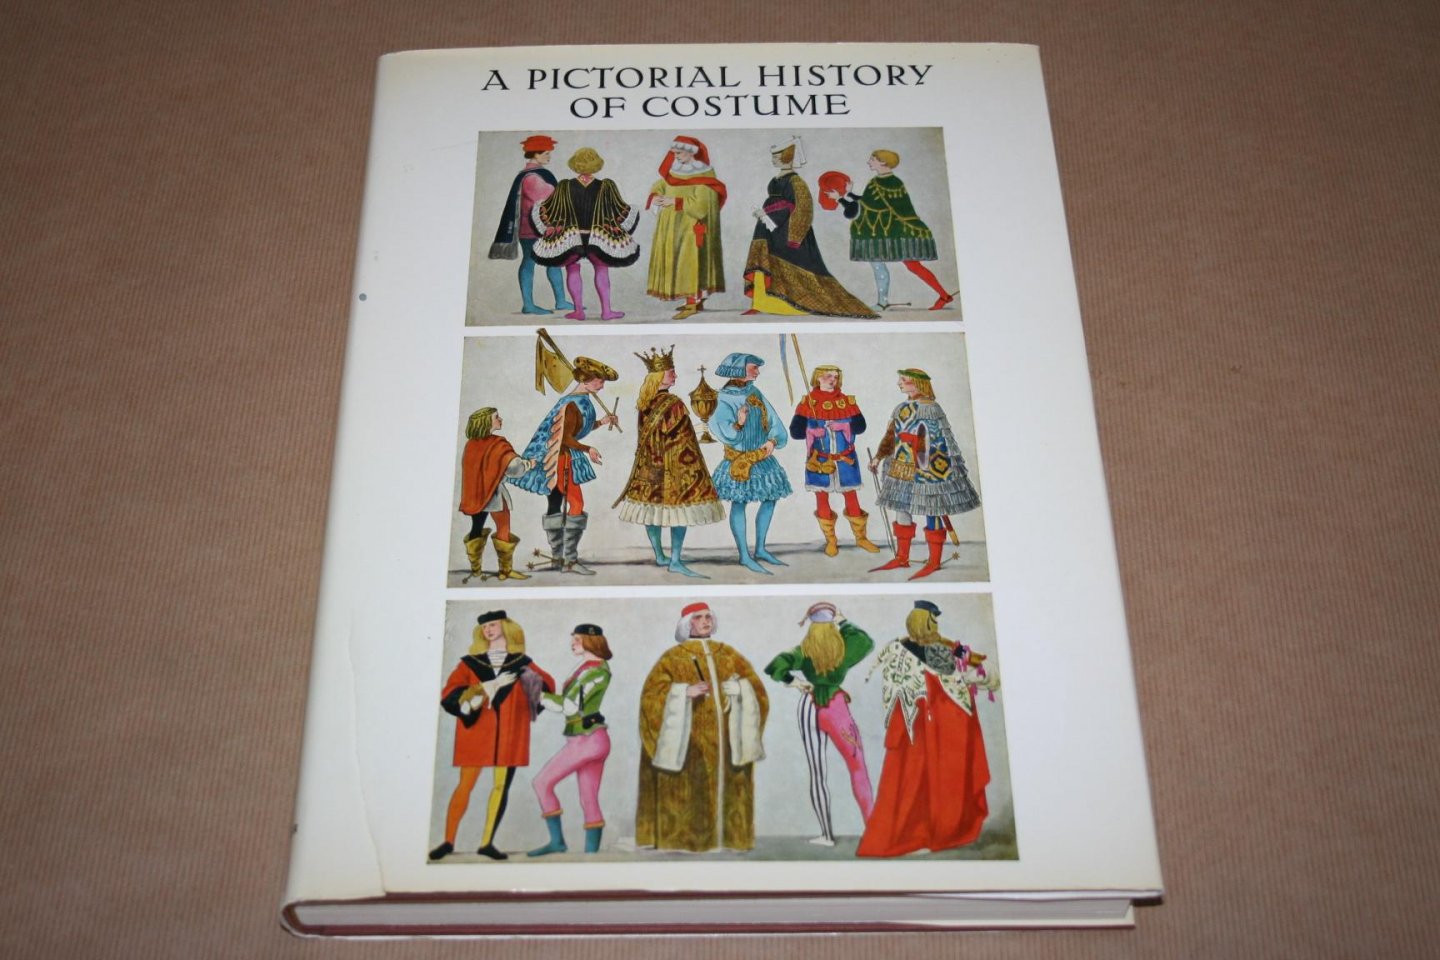 Bruhn & Tilke - A Pictorial History of Costume  --  A survey of costume of all periods and peoples from antiquity to modern times including national costumes in Europe and Non-European countries